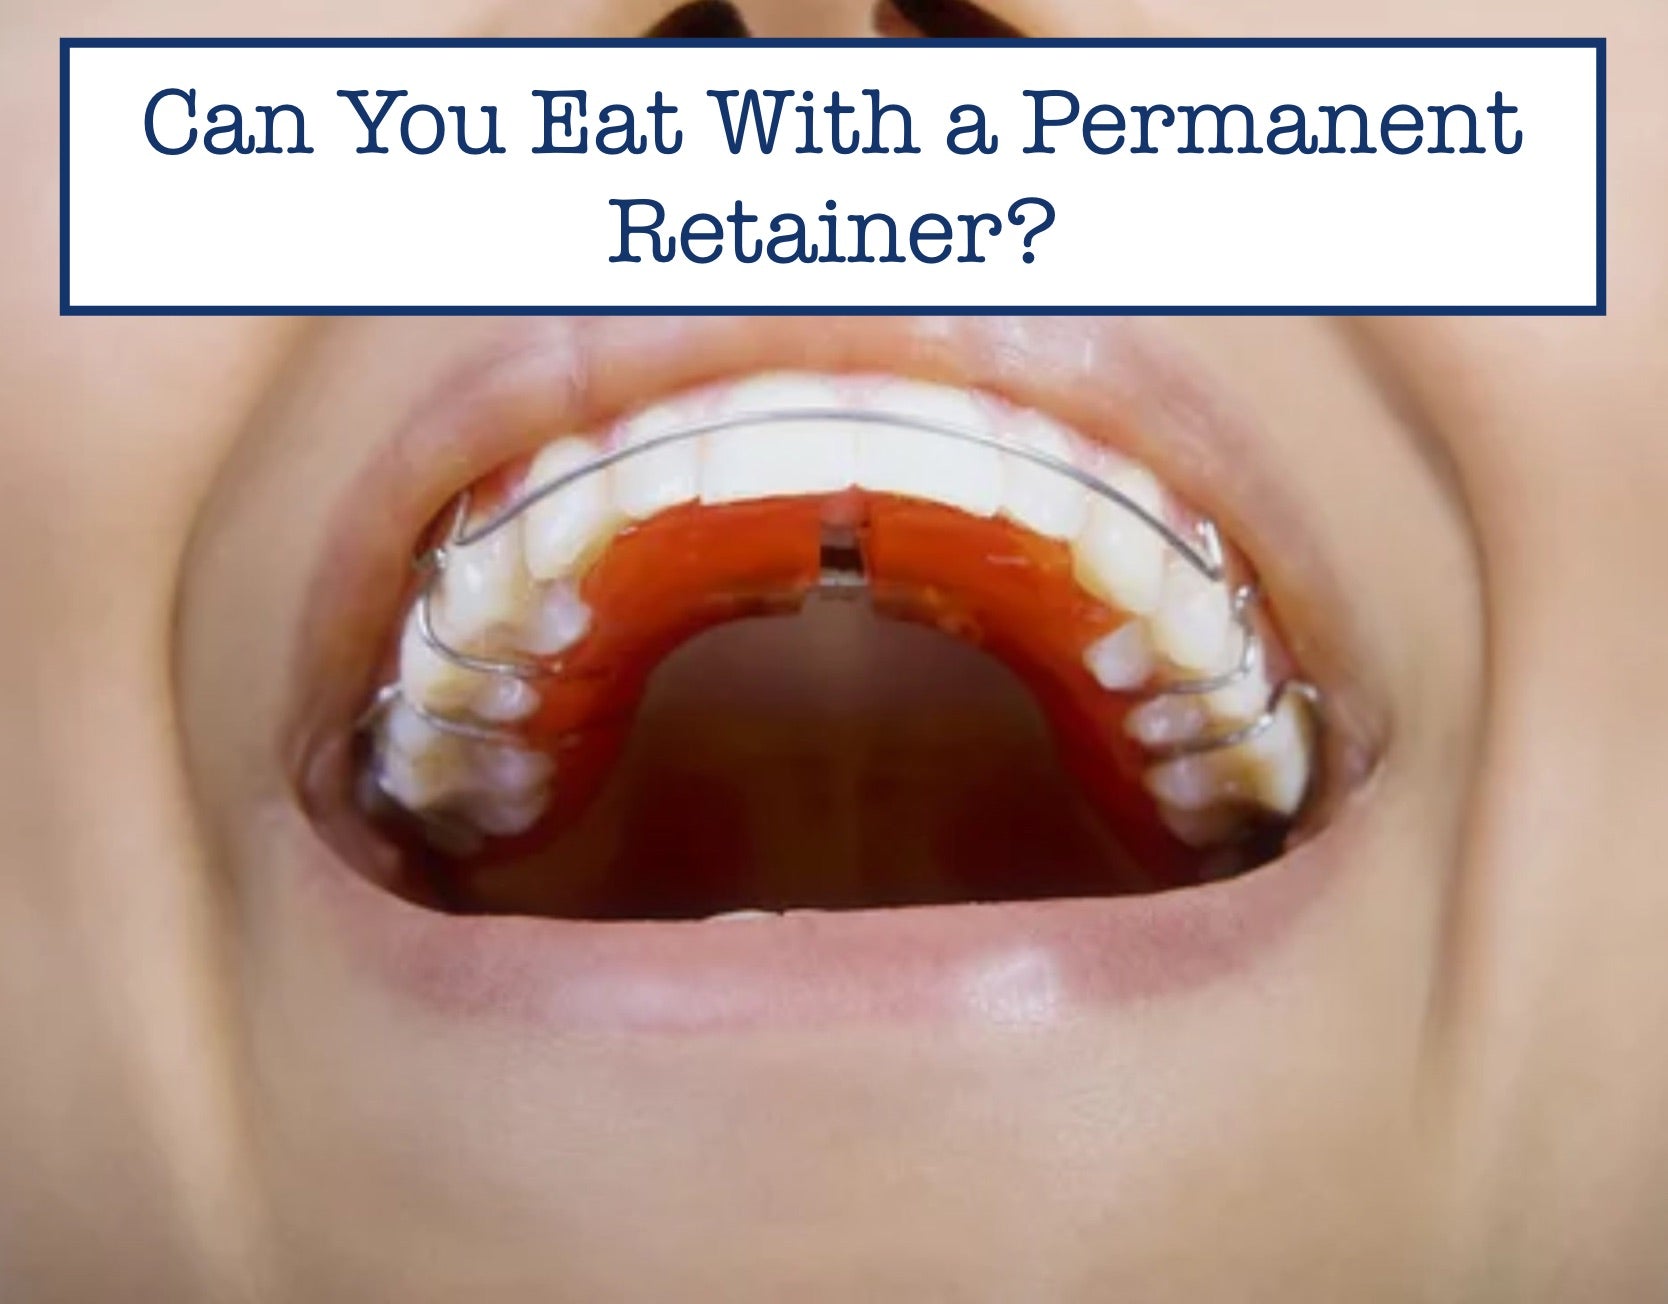 Can You Eat With a Permanent Retainer?